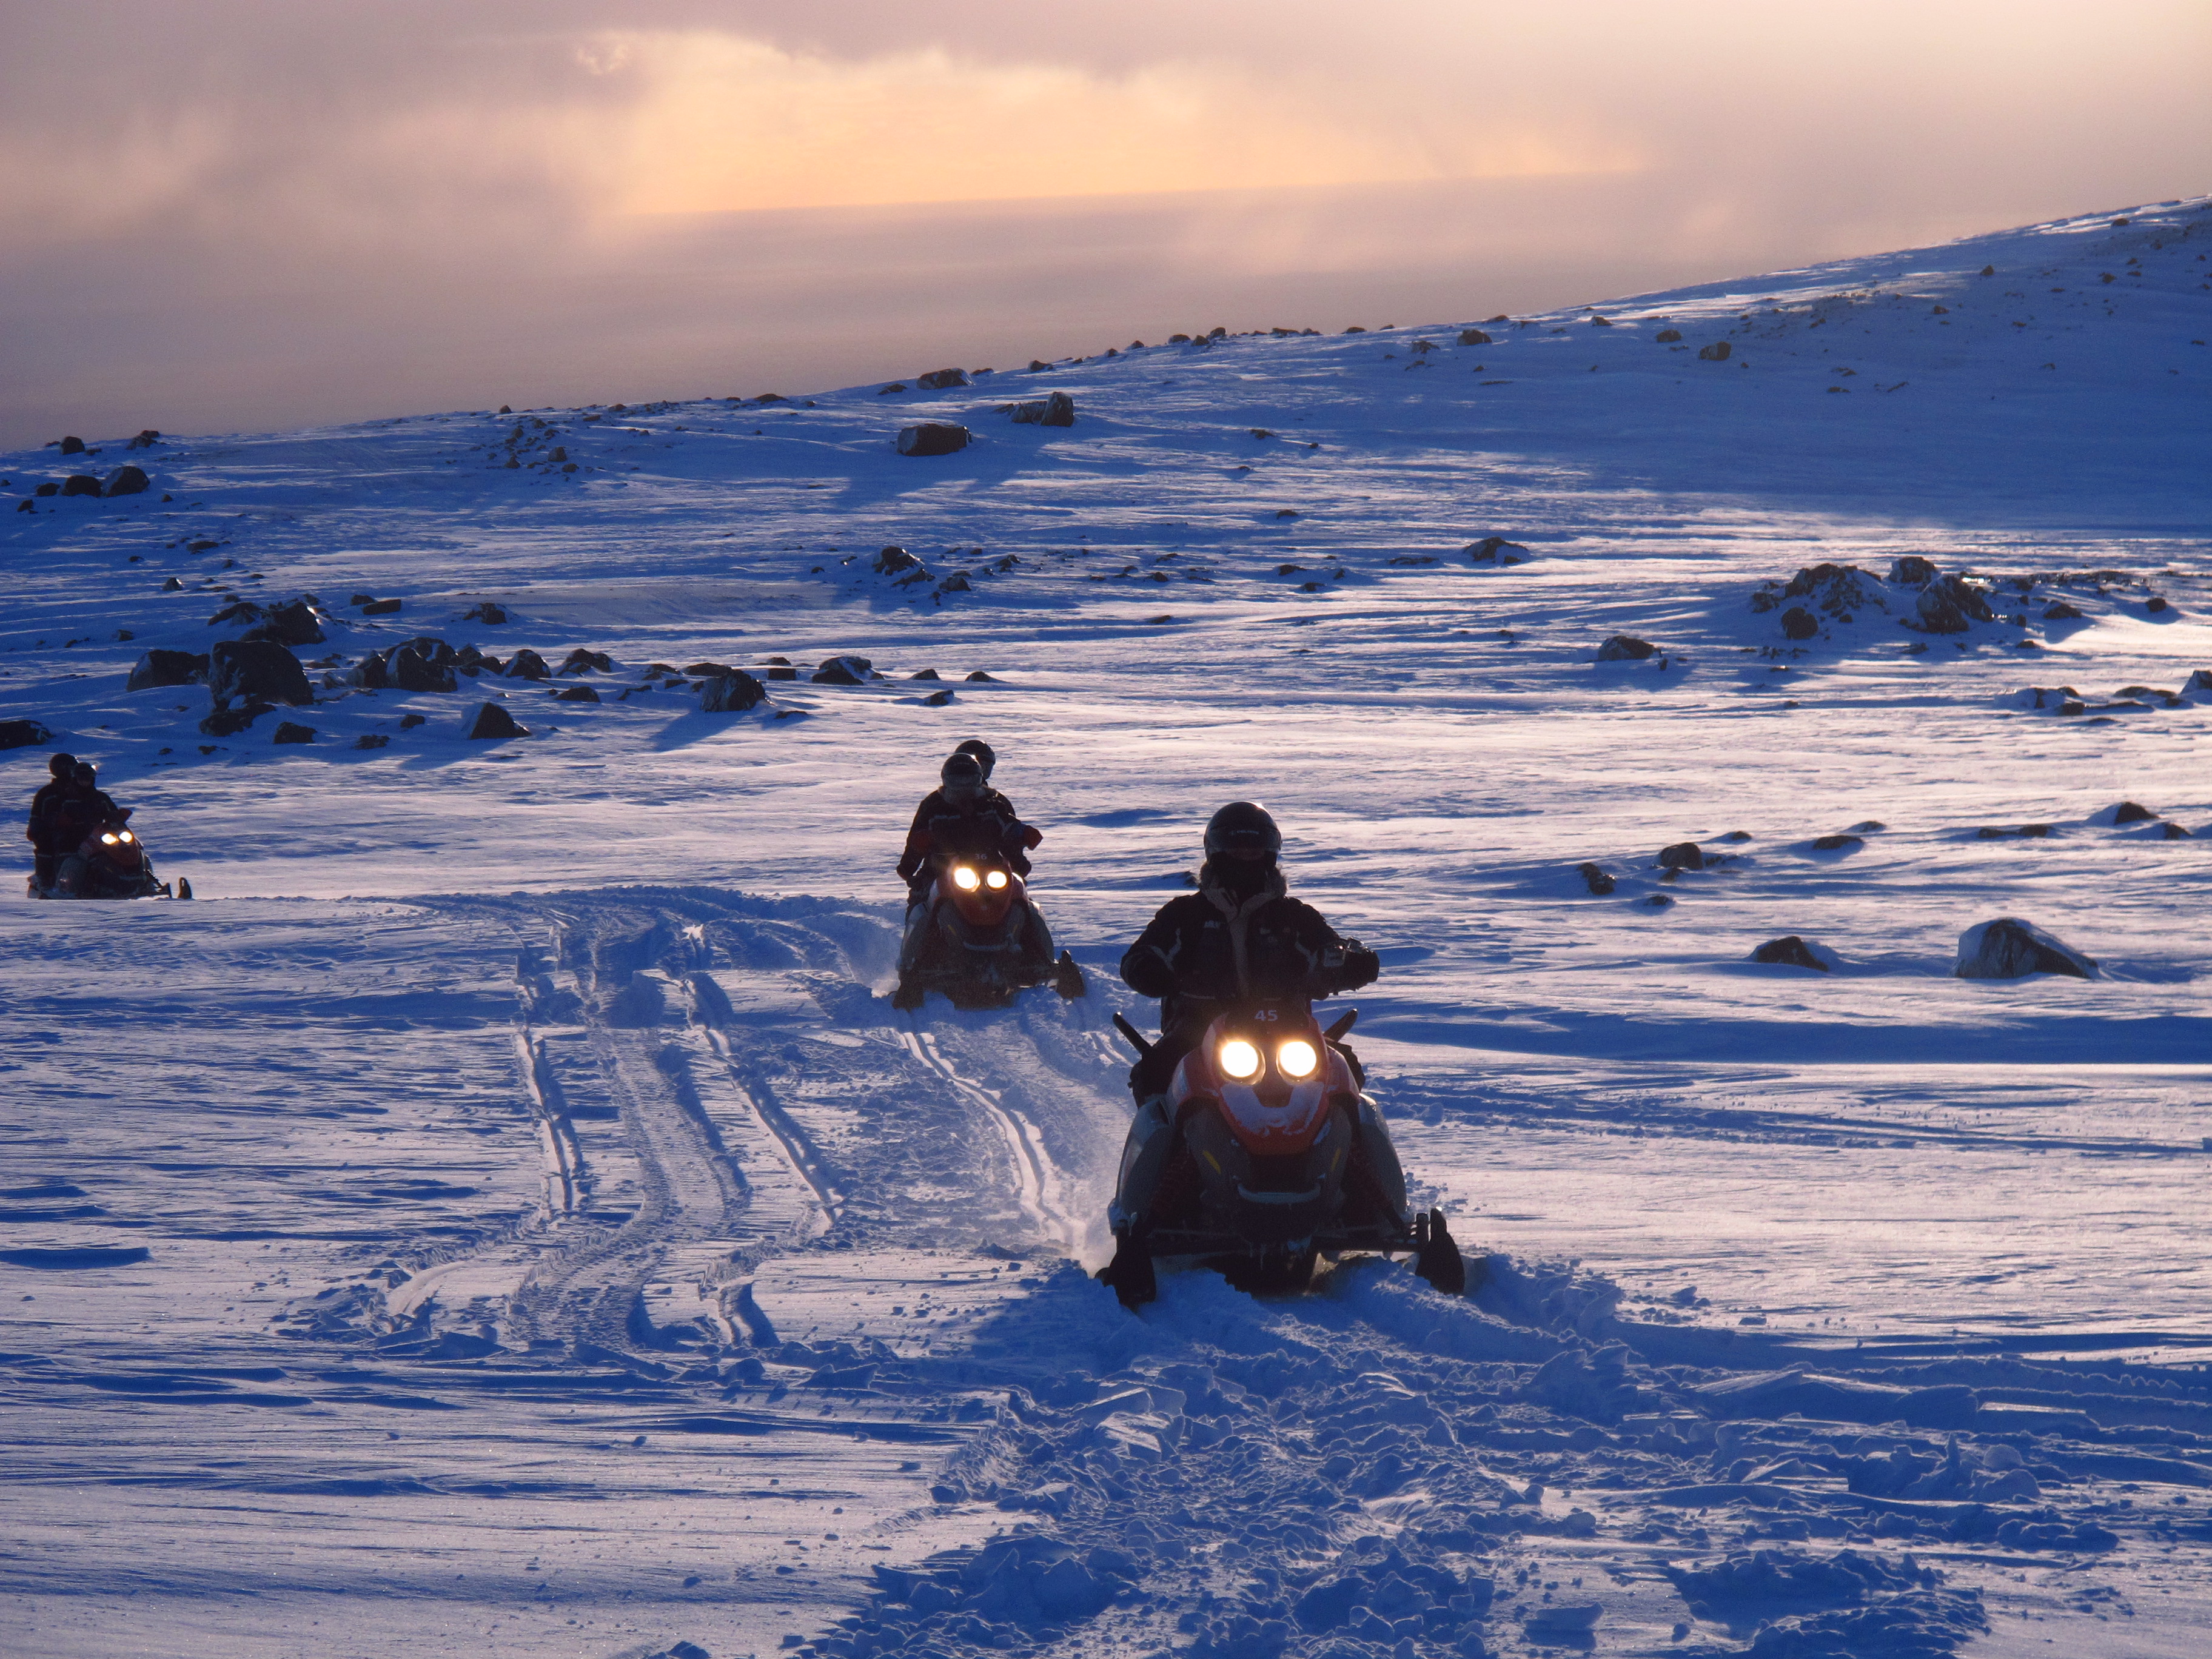 From your position on the snowmobile, you will have 360 degree views of Mýrdalsjökull Glacier.